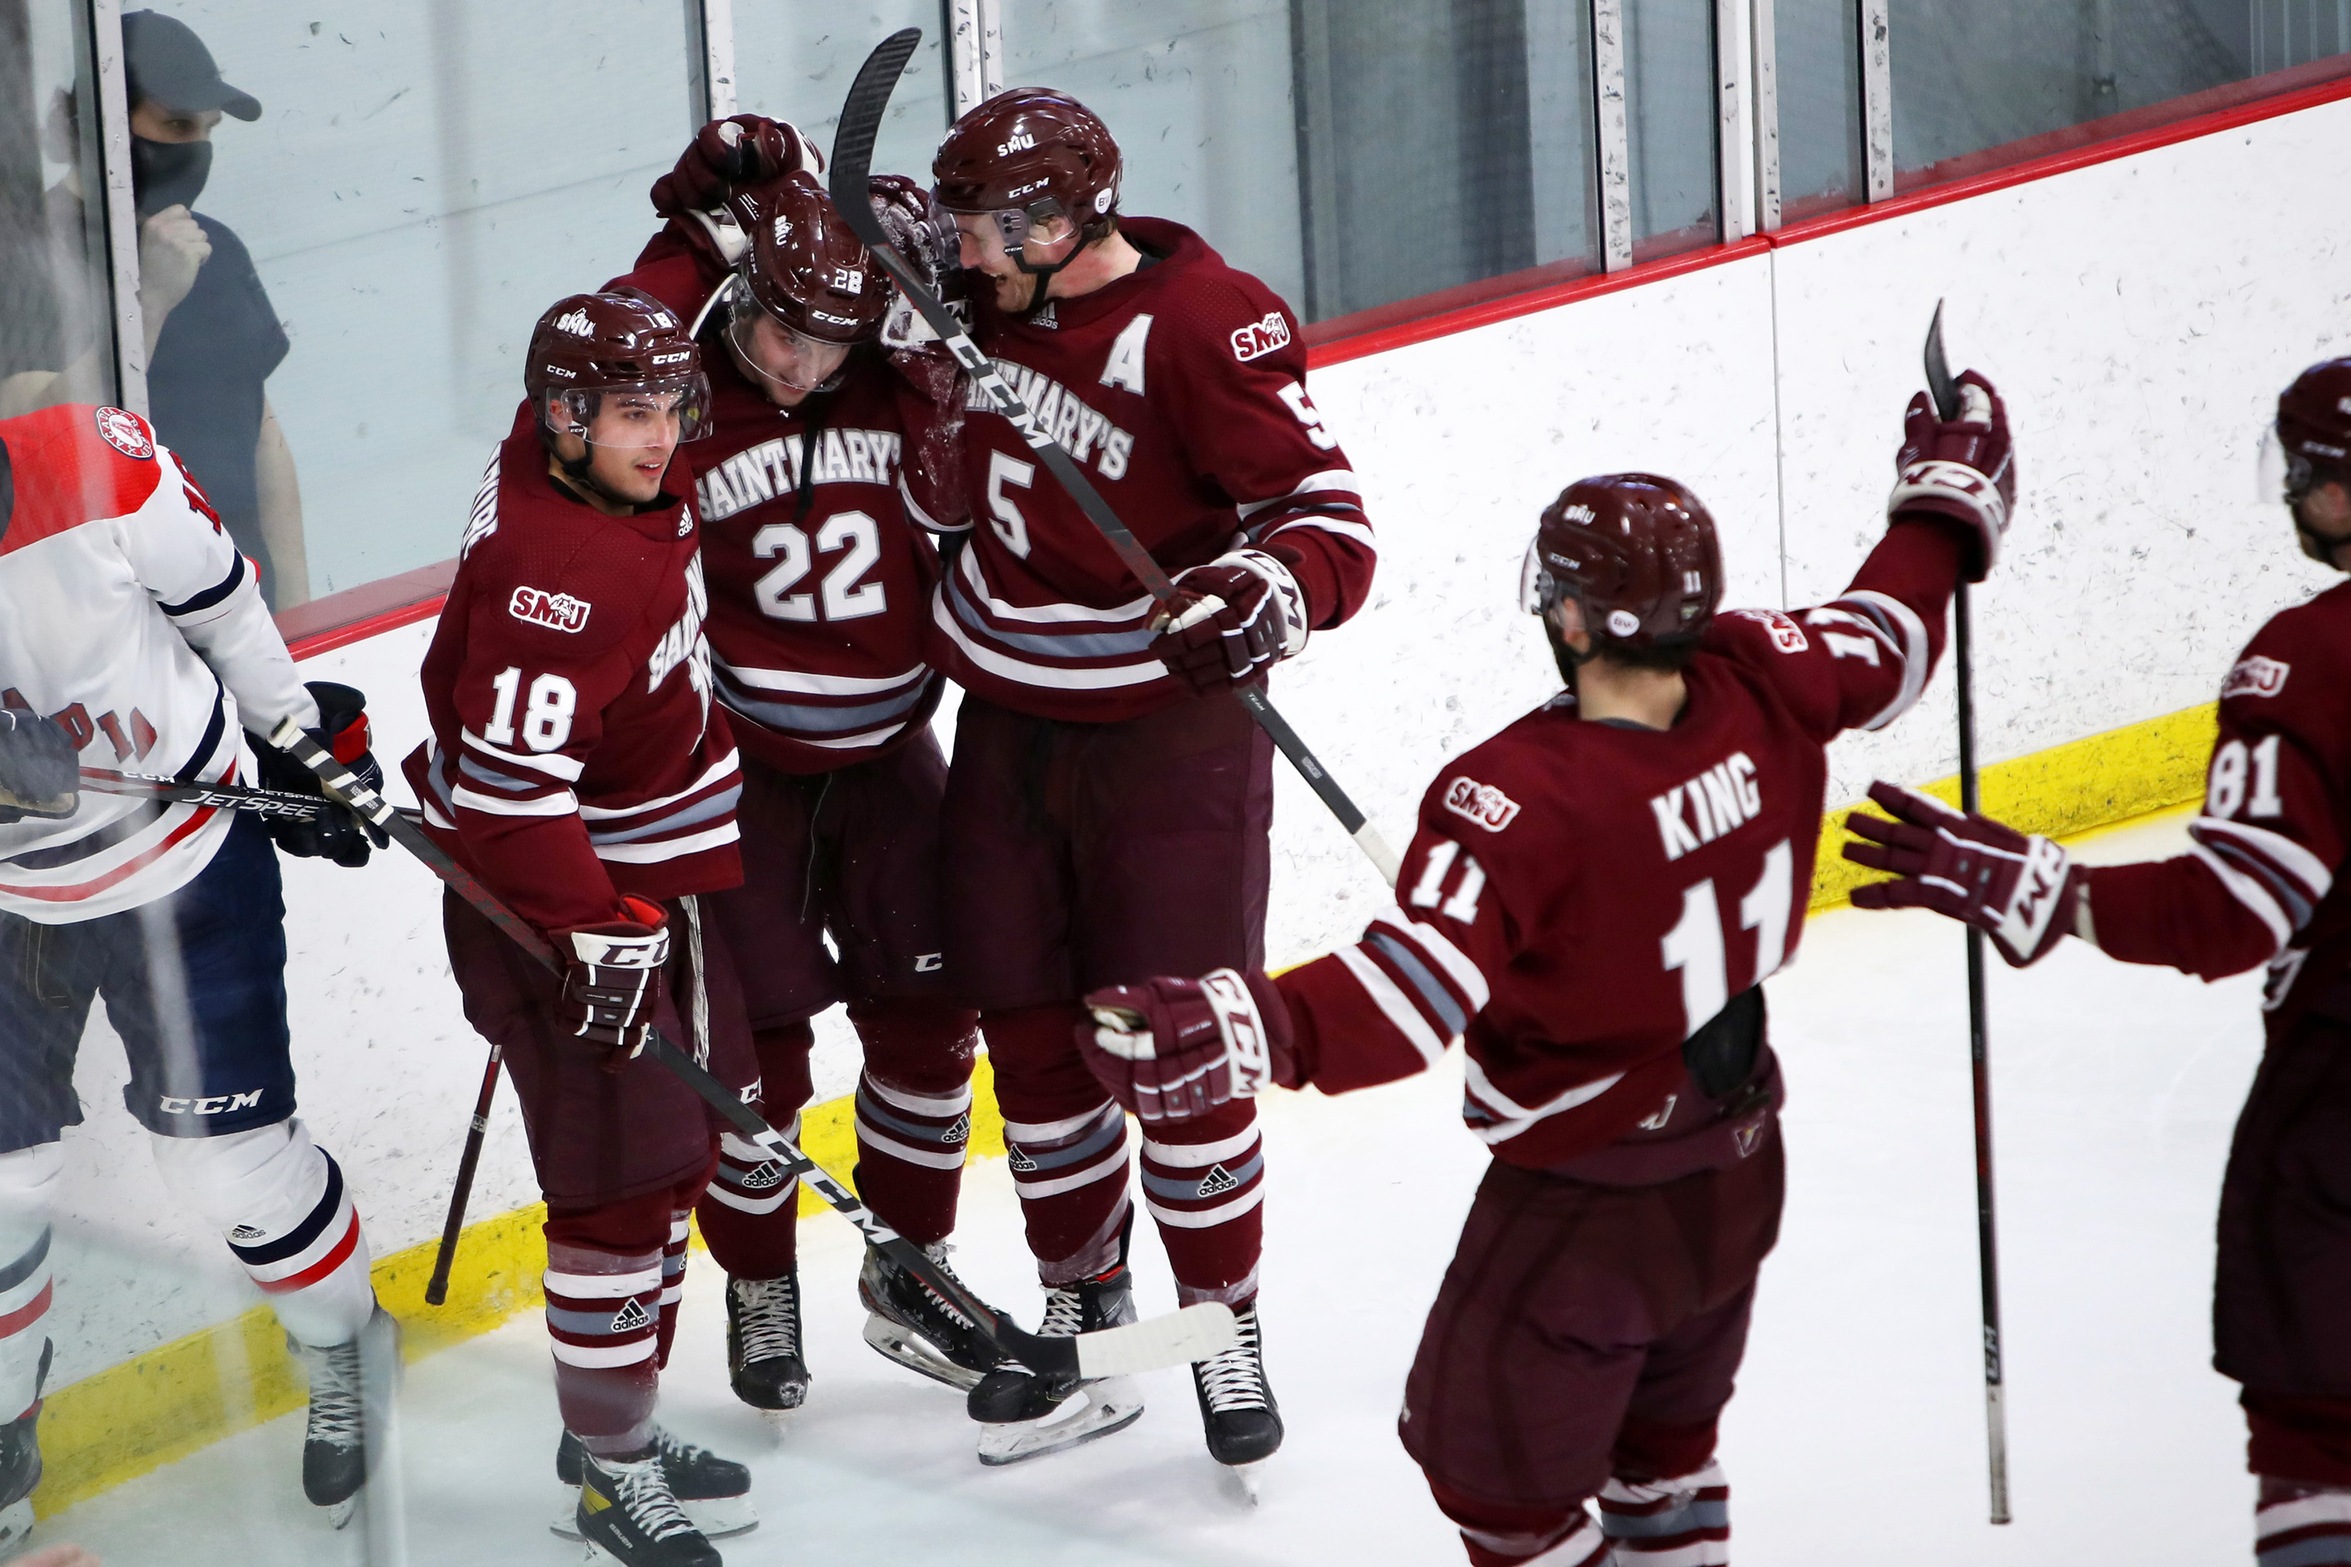 Huskies forward Ben Higgins (#22) celebrates with teammates after scoring his first career AUS goal in a 2-0 win over Acadia on March 2, 2022. (Photo by Nick Pearce / SMU Huskies Athletics)